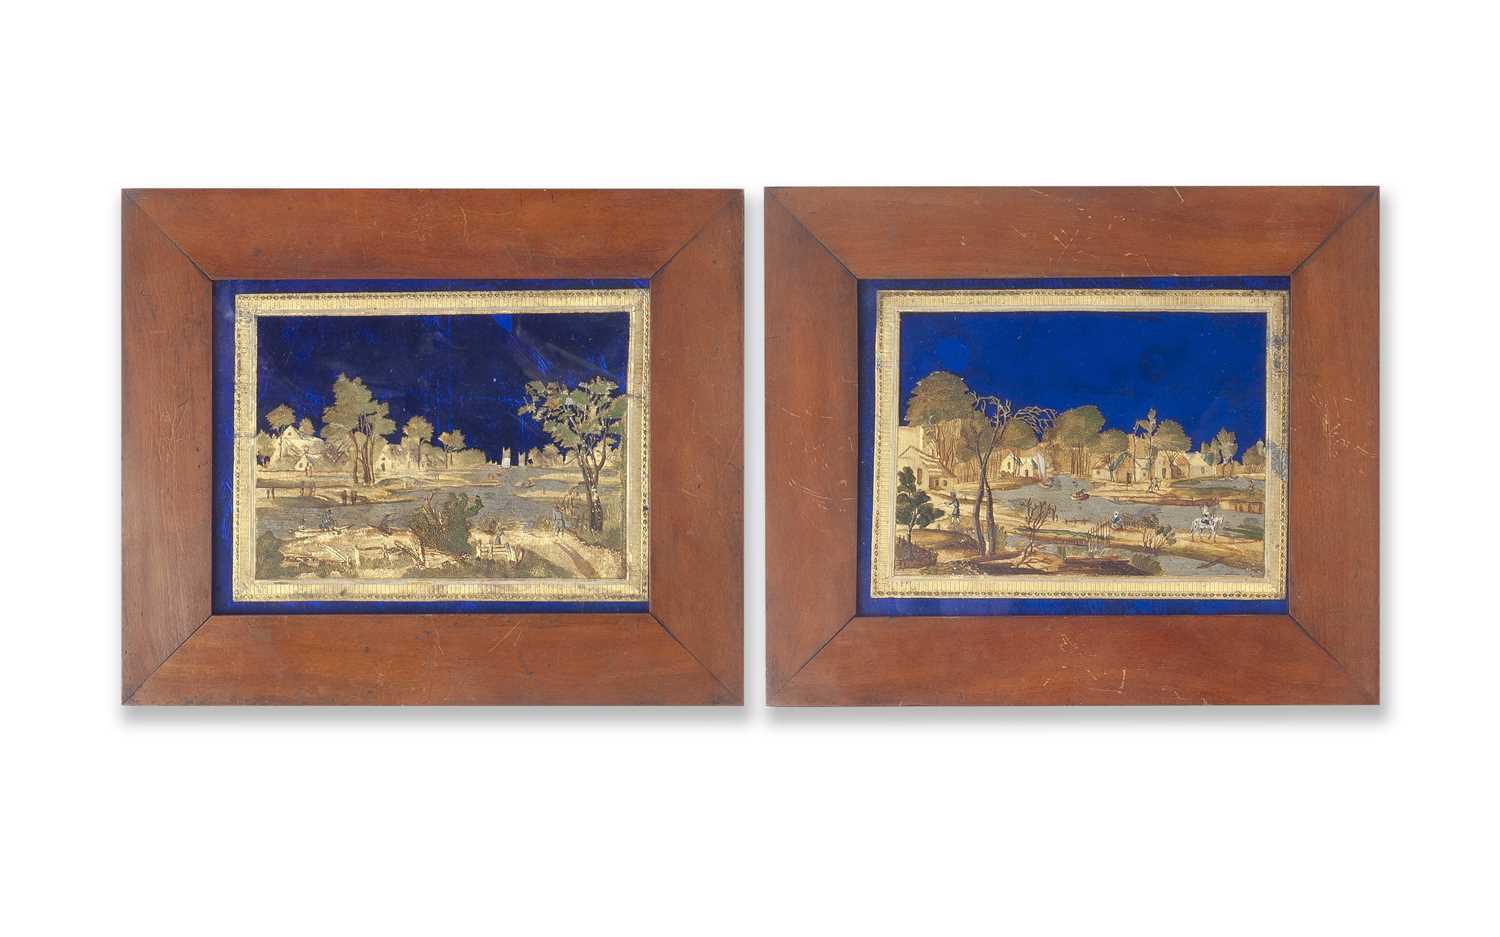 ATTRIBUTED TO COMPIGNE: A PAIR OF 18TH CENTURY PEWTER, BRASS, GILT AND PAINTED GLASS LANDSCAPES